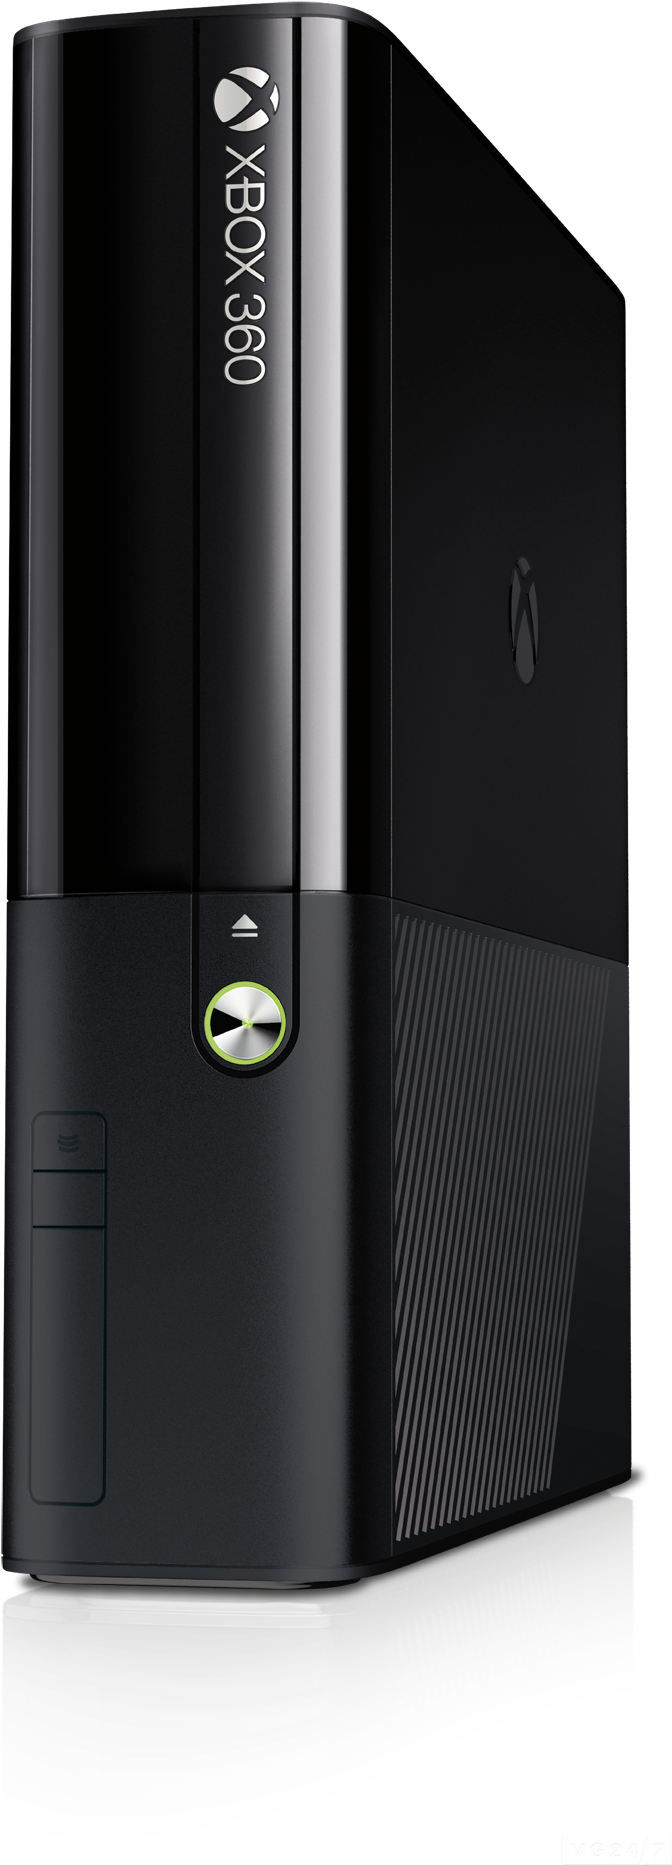 Xbox360 Console Vertical Standing